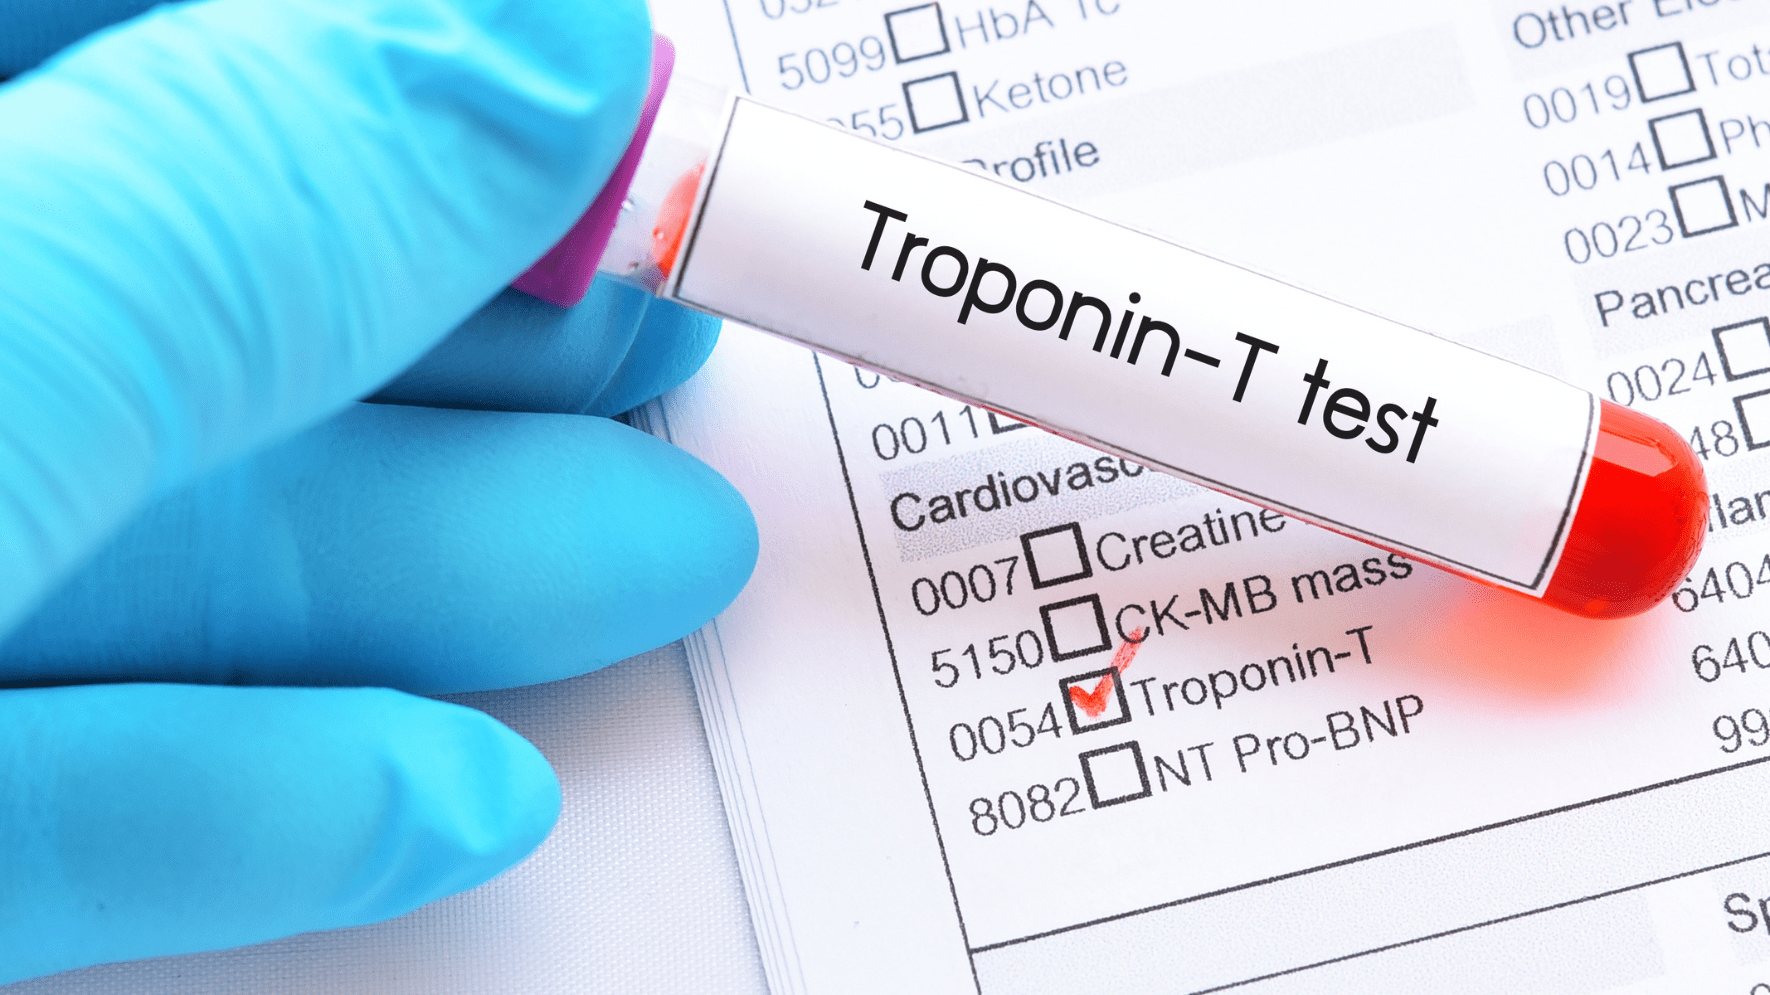 State of the art IVDR Troponin